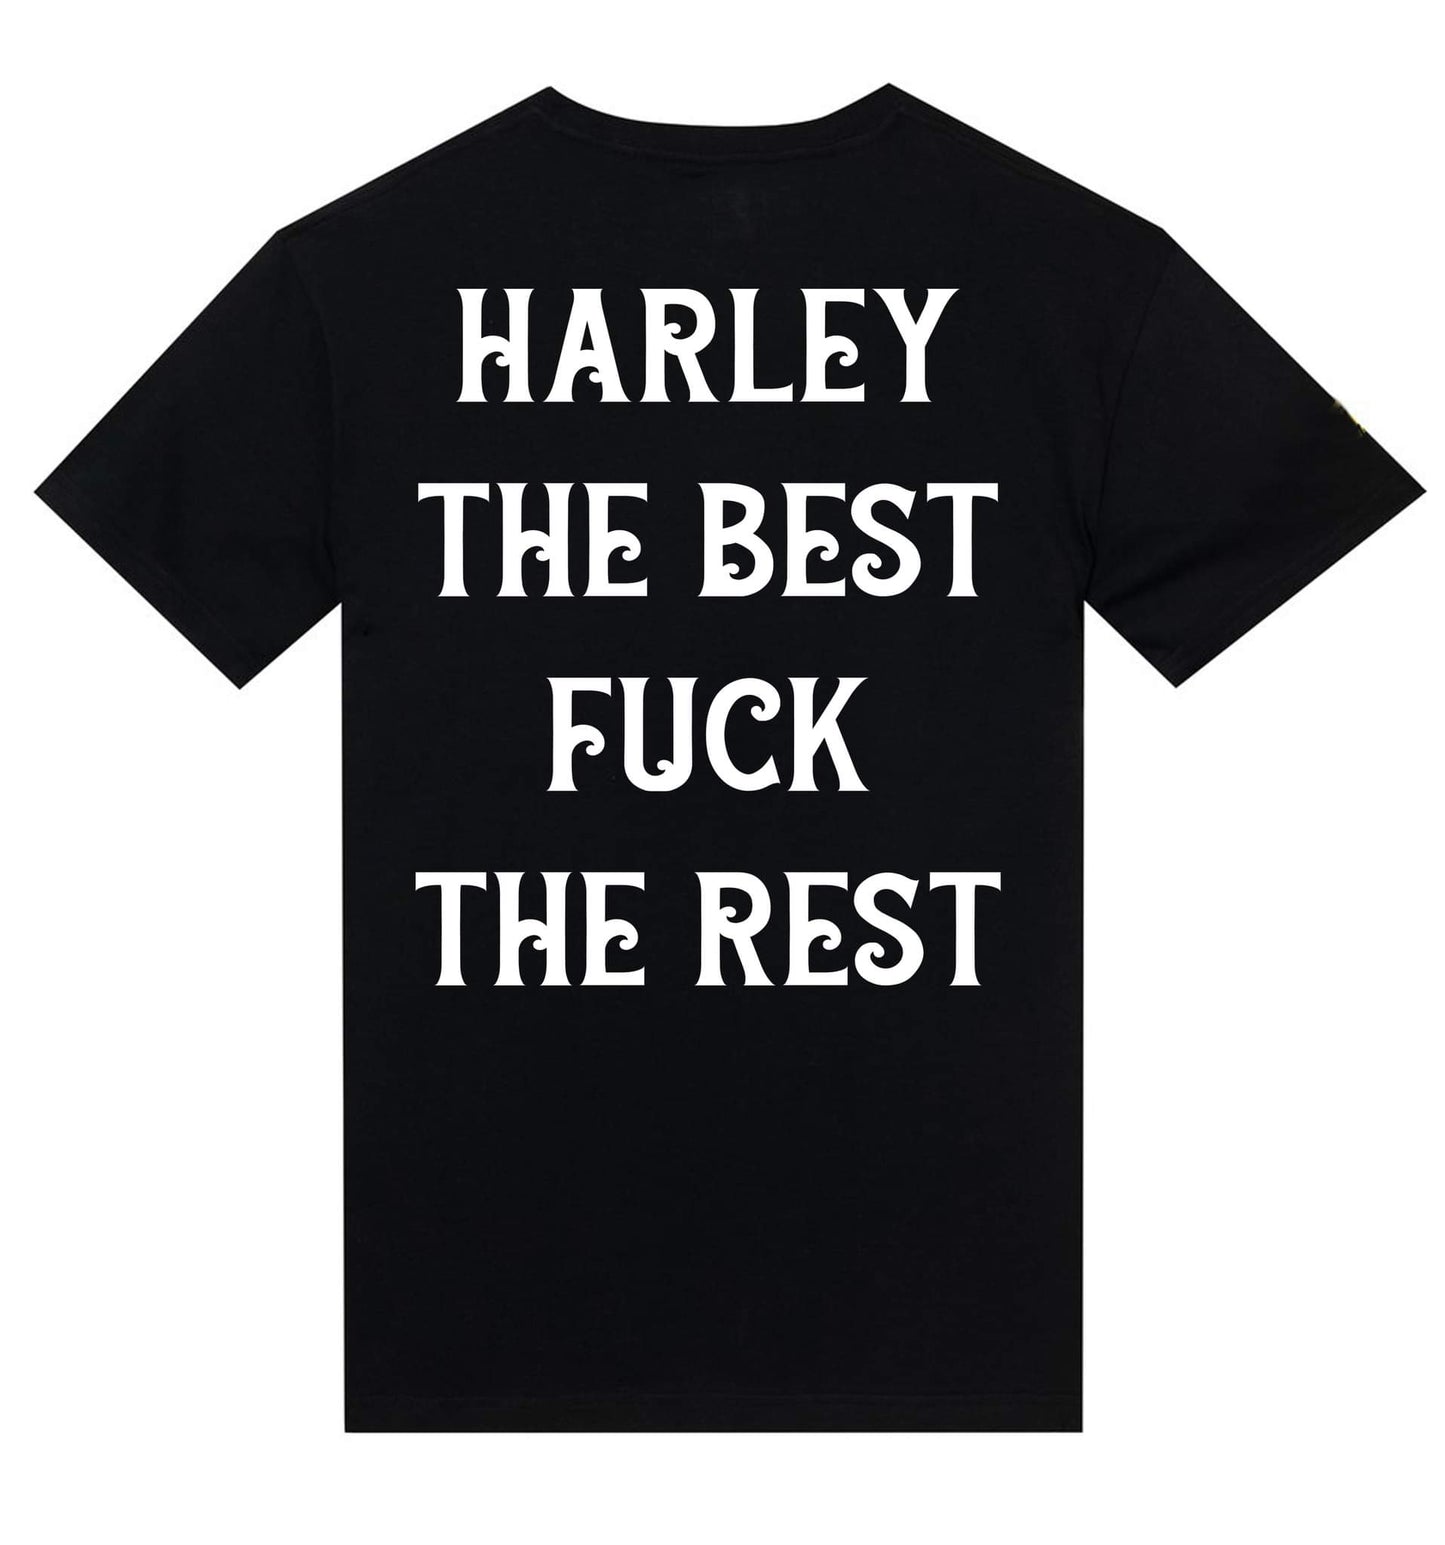 T-shirt "Harley the Best Fuck the Rest"